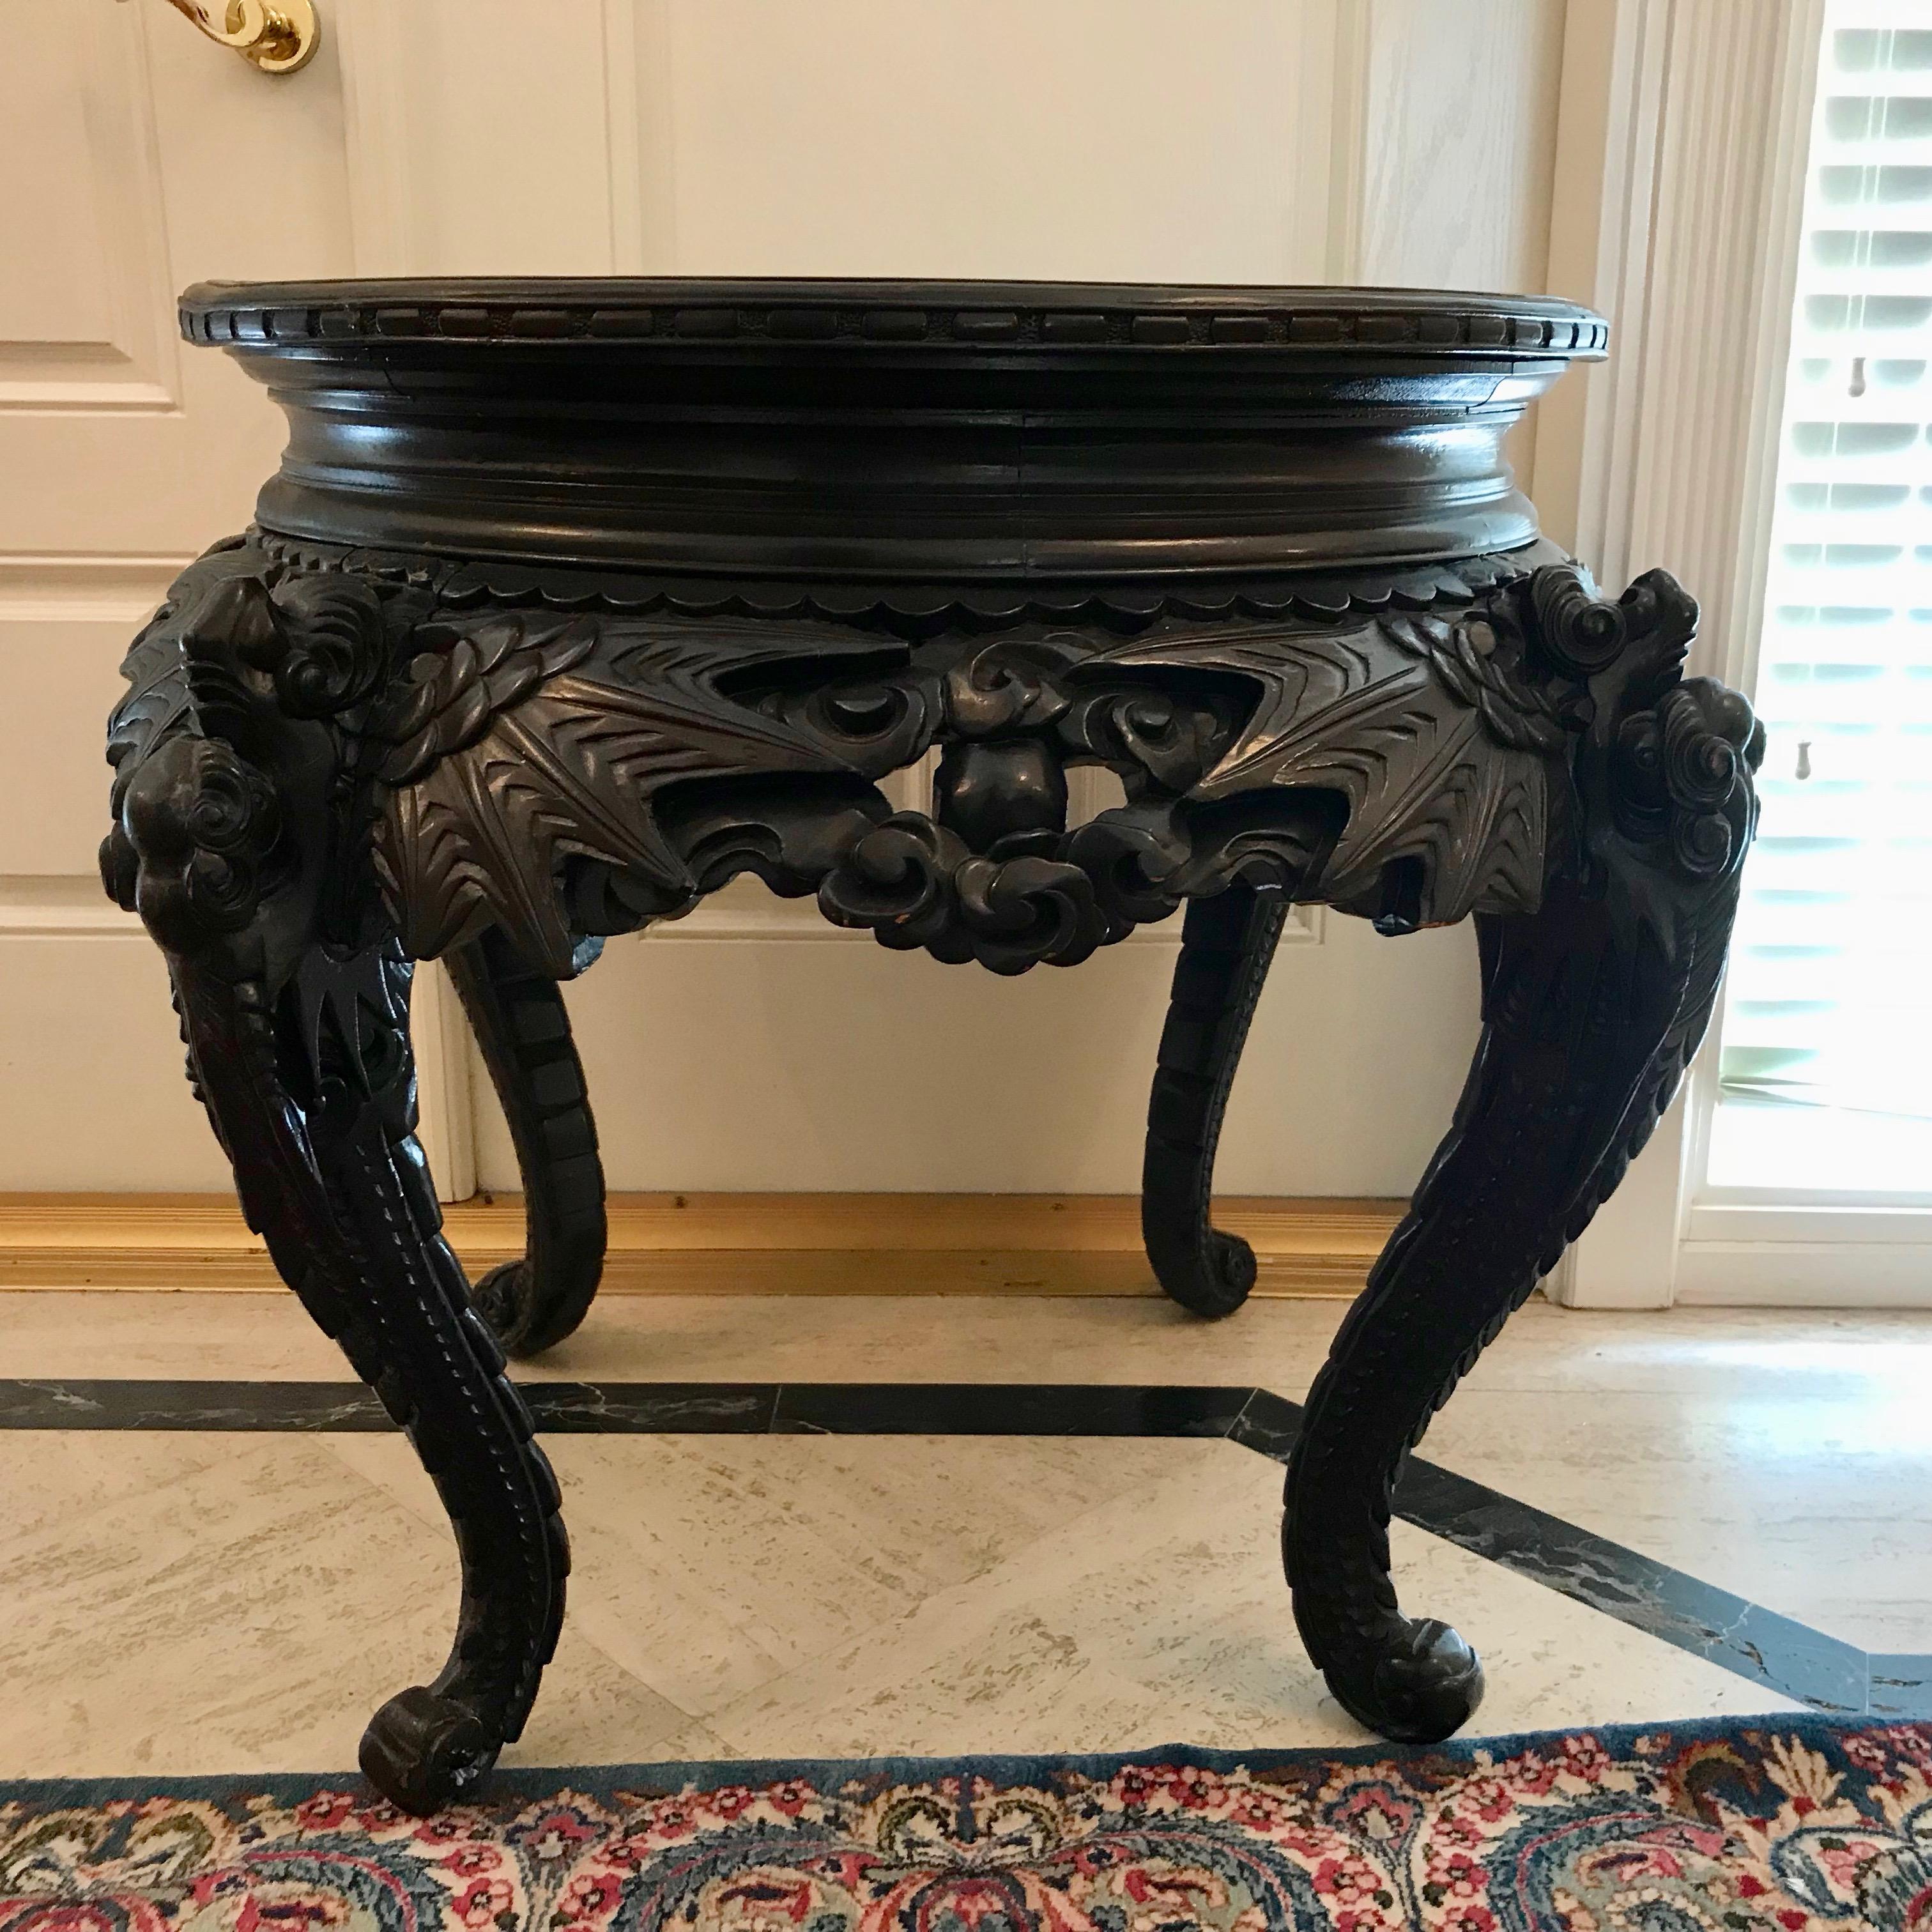 Dramatic in form and scale. The table is fashioned with a generously scaled pierced carved apron and appointed with large figures of bats with wings
spread across the apron